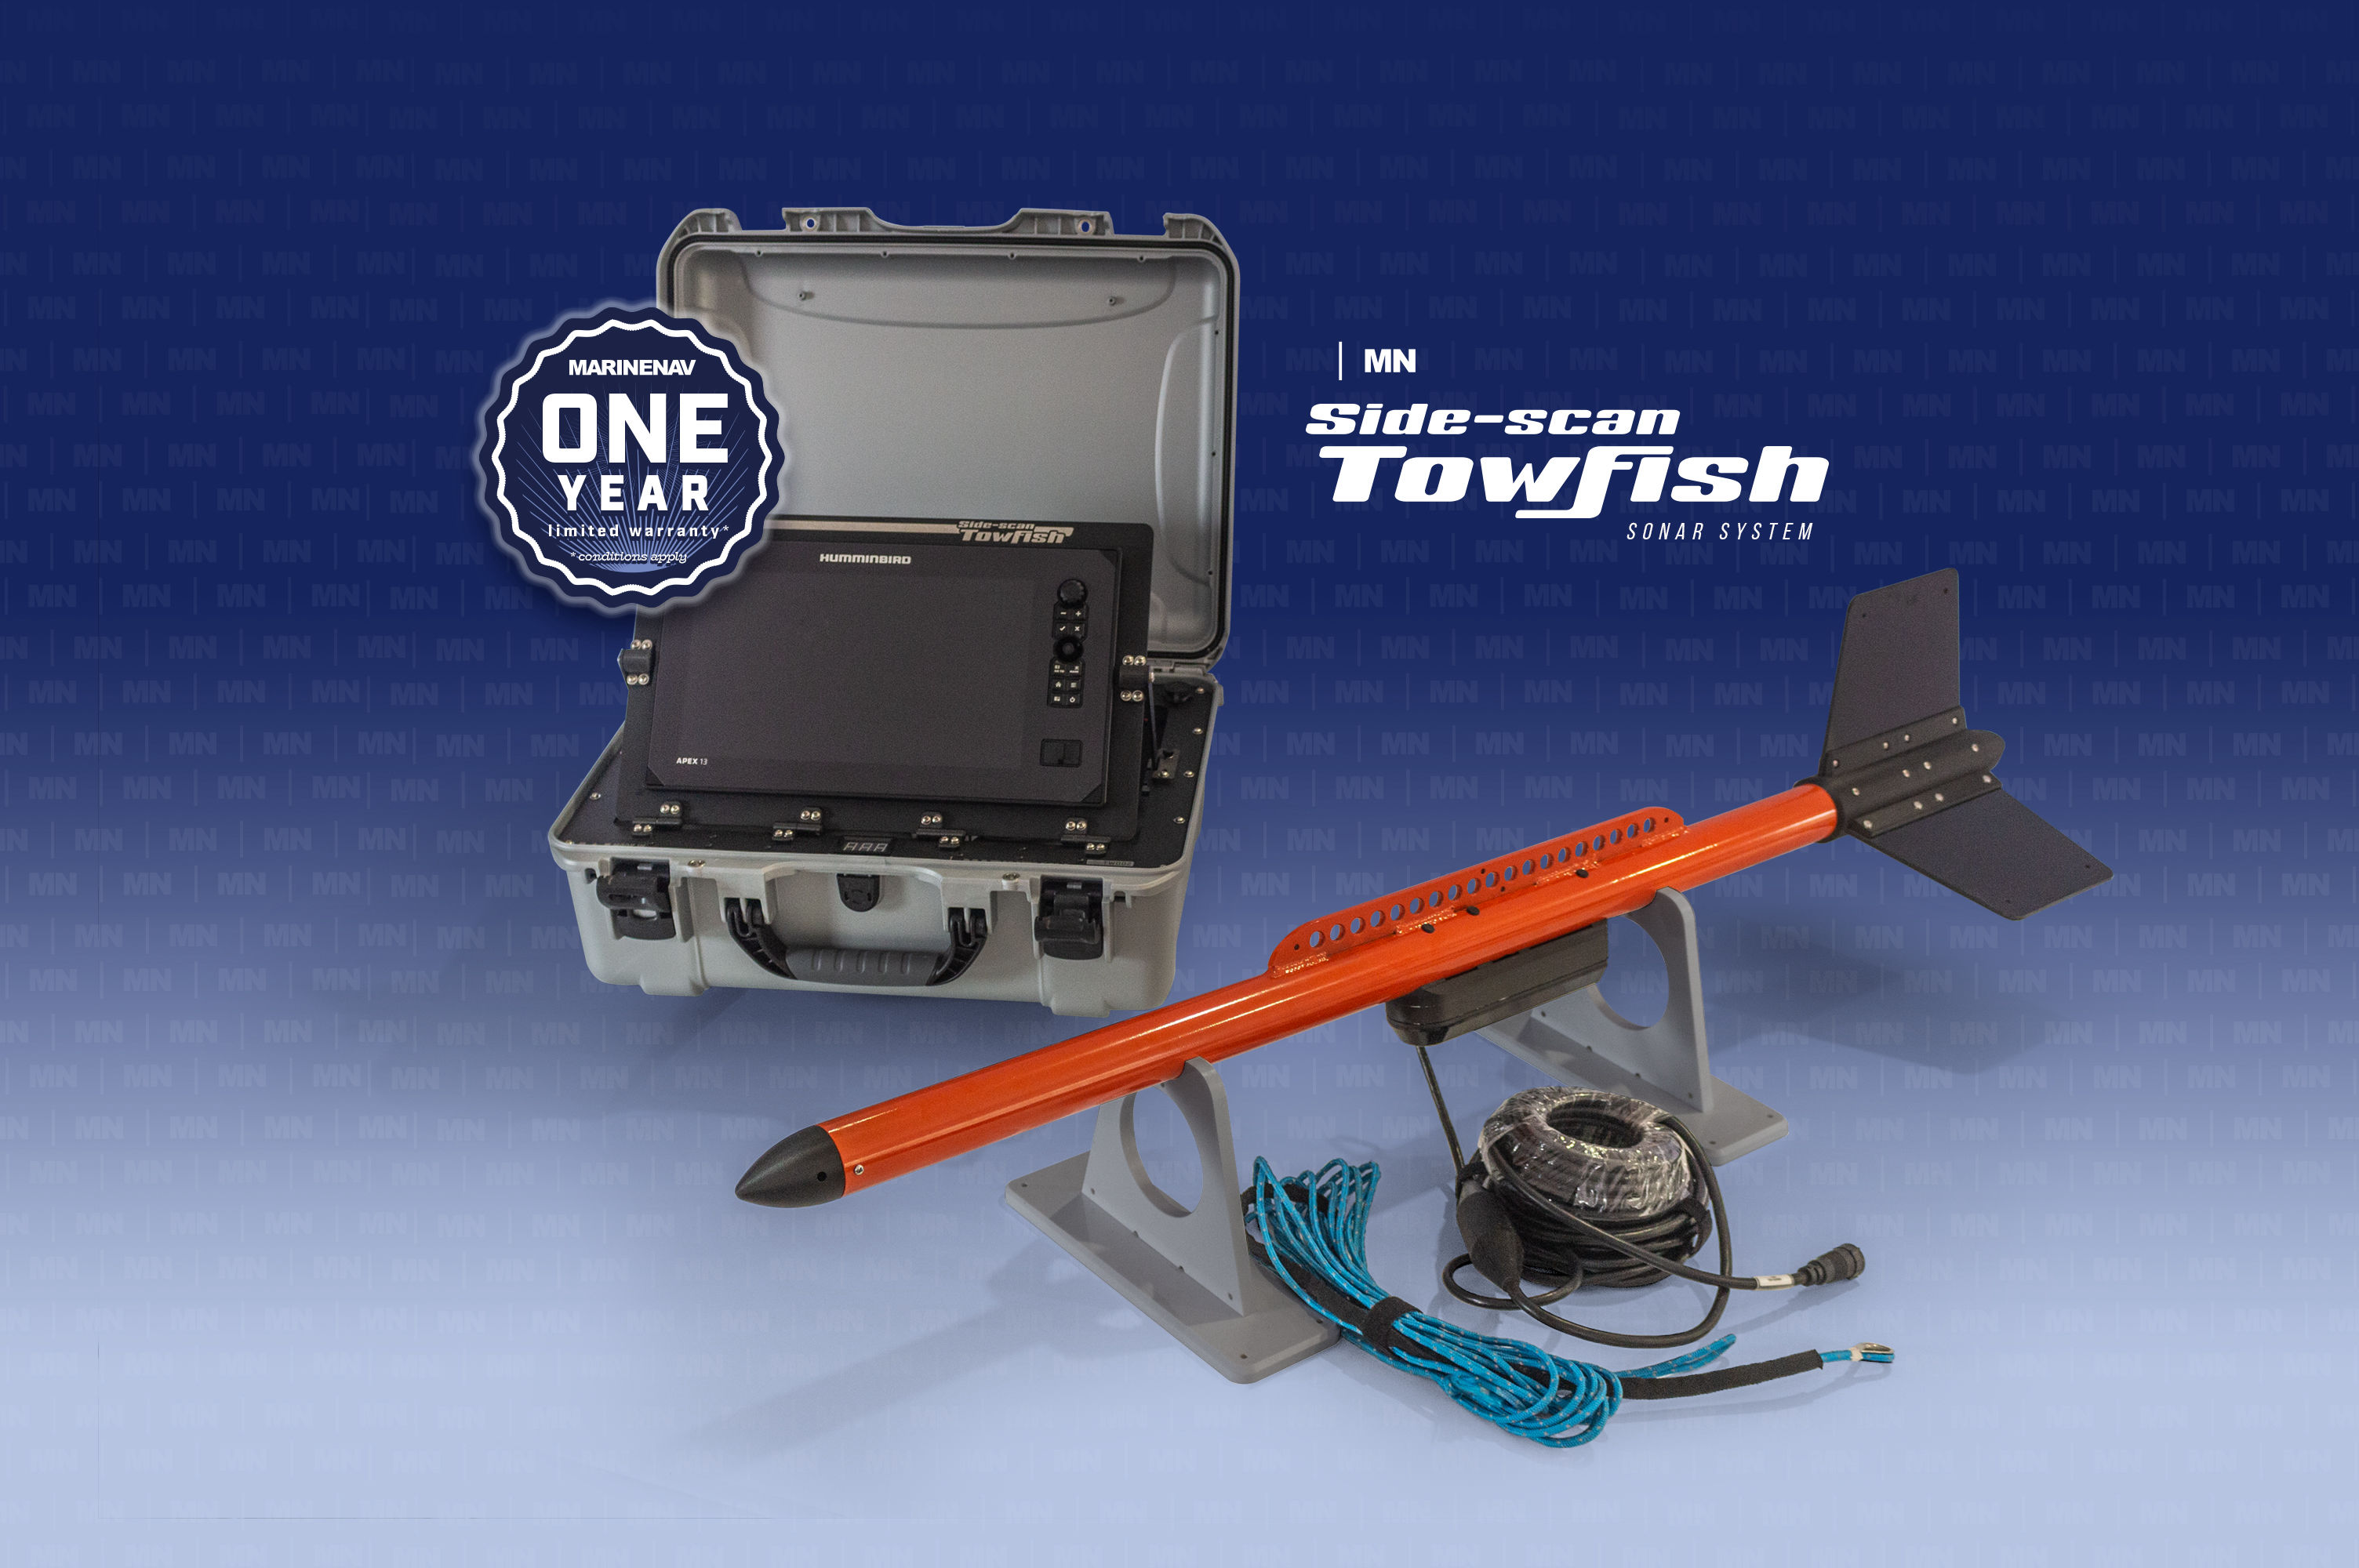 A compact, self-contained water resistant case organizes and protects essential ROV accessories.